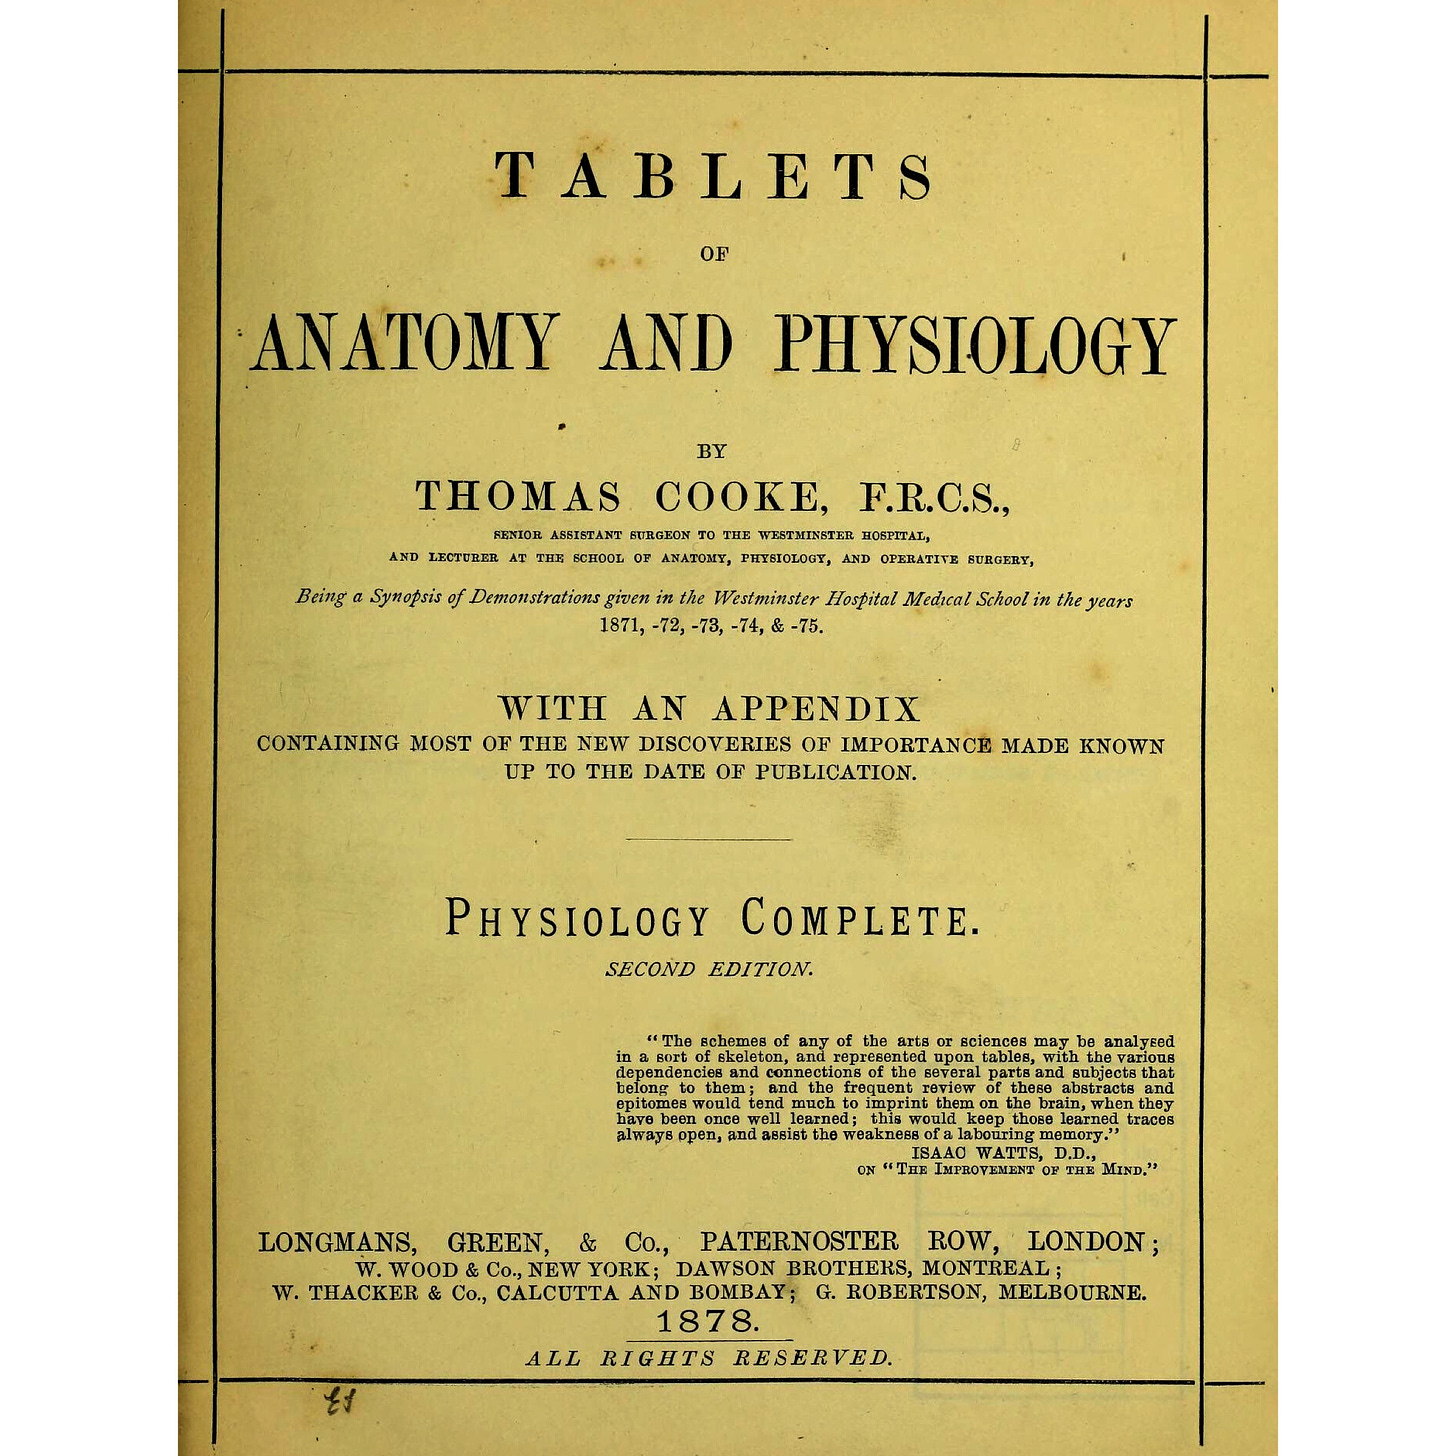 The image shows a title page for an 1878 book called 'Tablets of Anatomy and Physiology' by Thomas Cooke FRCS